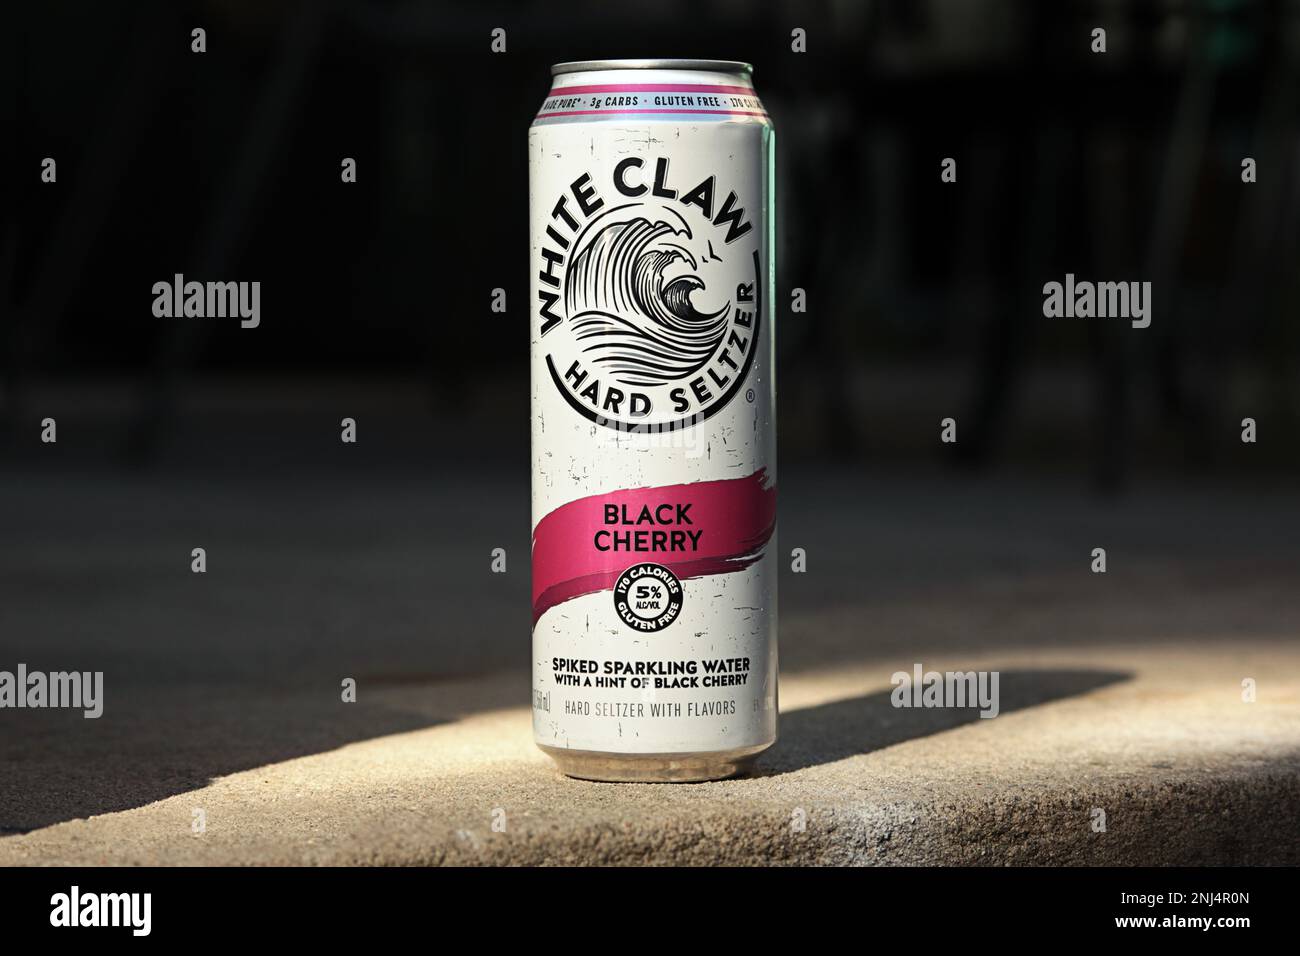 Bronx, NY - June 16, 2021: Close up of Black Cherry flavor White Claw brand hard seltzer can on an urban concrete patio Stock Photo